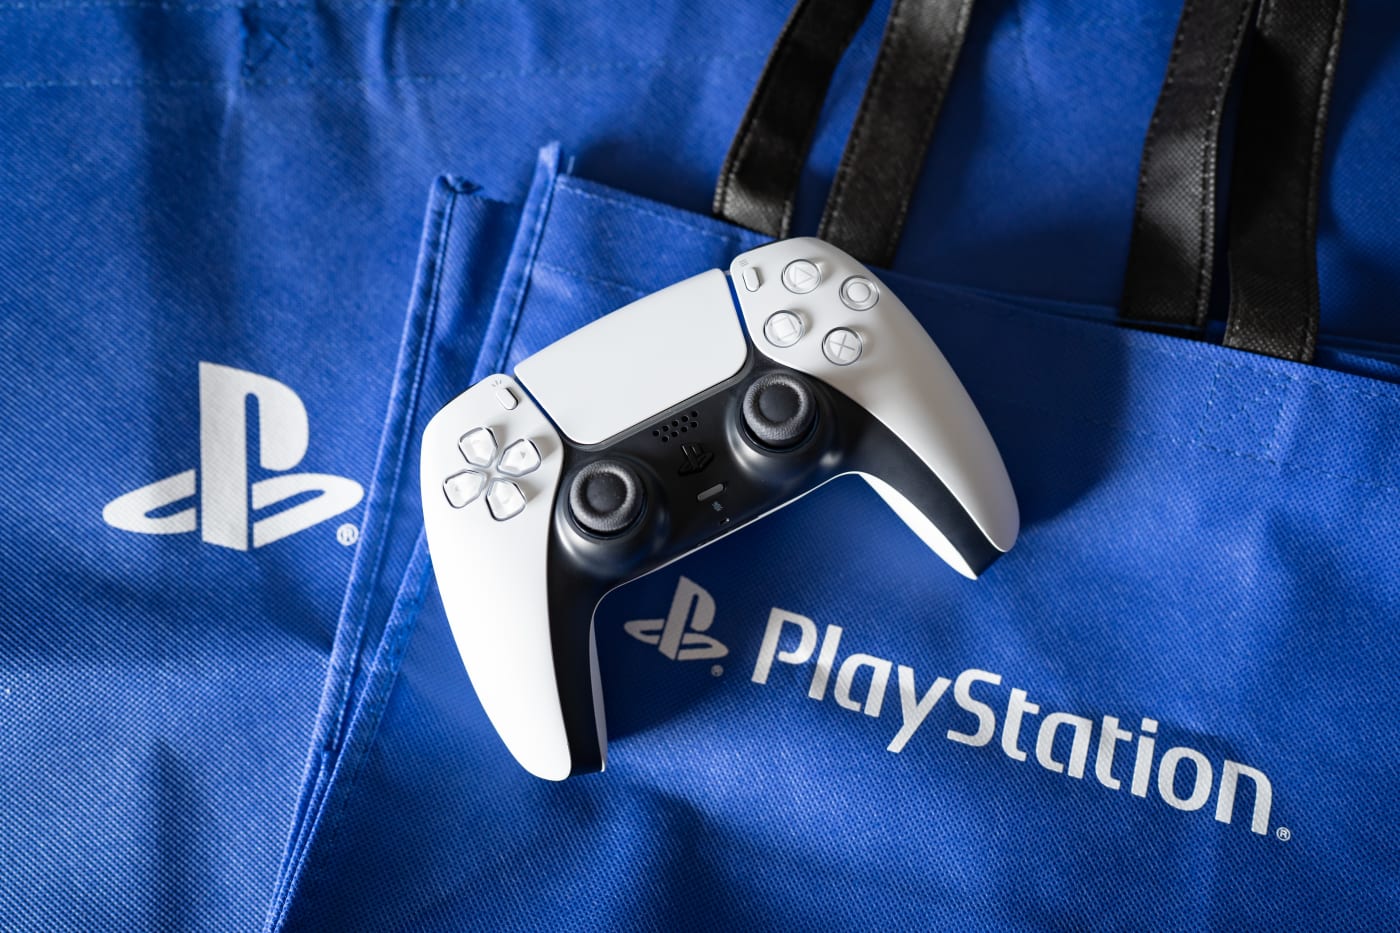 PlayStation now supports passkey sign-ins